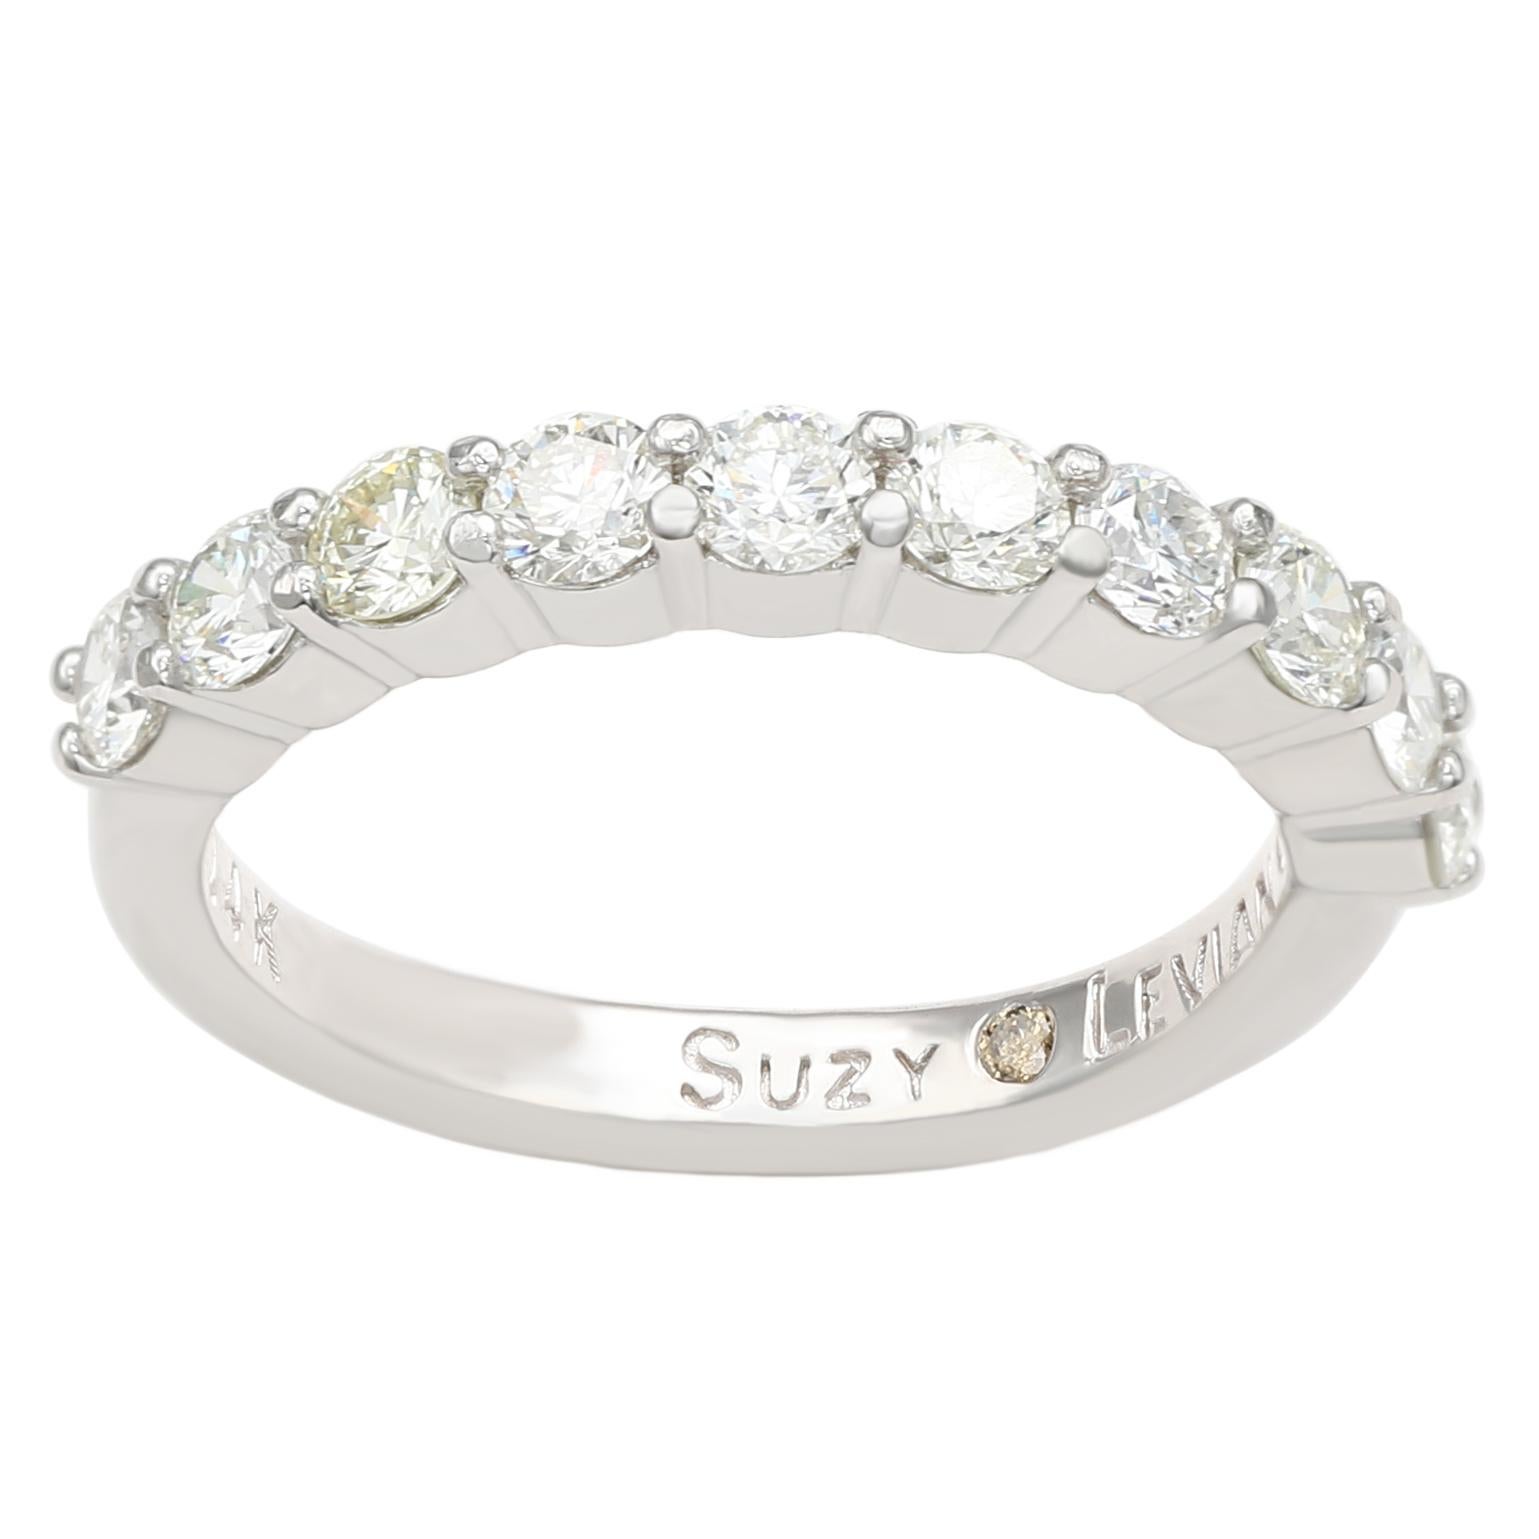 This elegant Suzy Levian diamond half eternity band features a total of ten round cut diamonds (G-H, S1-S2). The diamonds sparkle along half the eternity band, for a sparkle you can't miss with a comfort fit. Designed by Suzy Levian , this 14k white